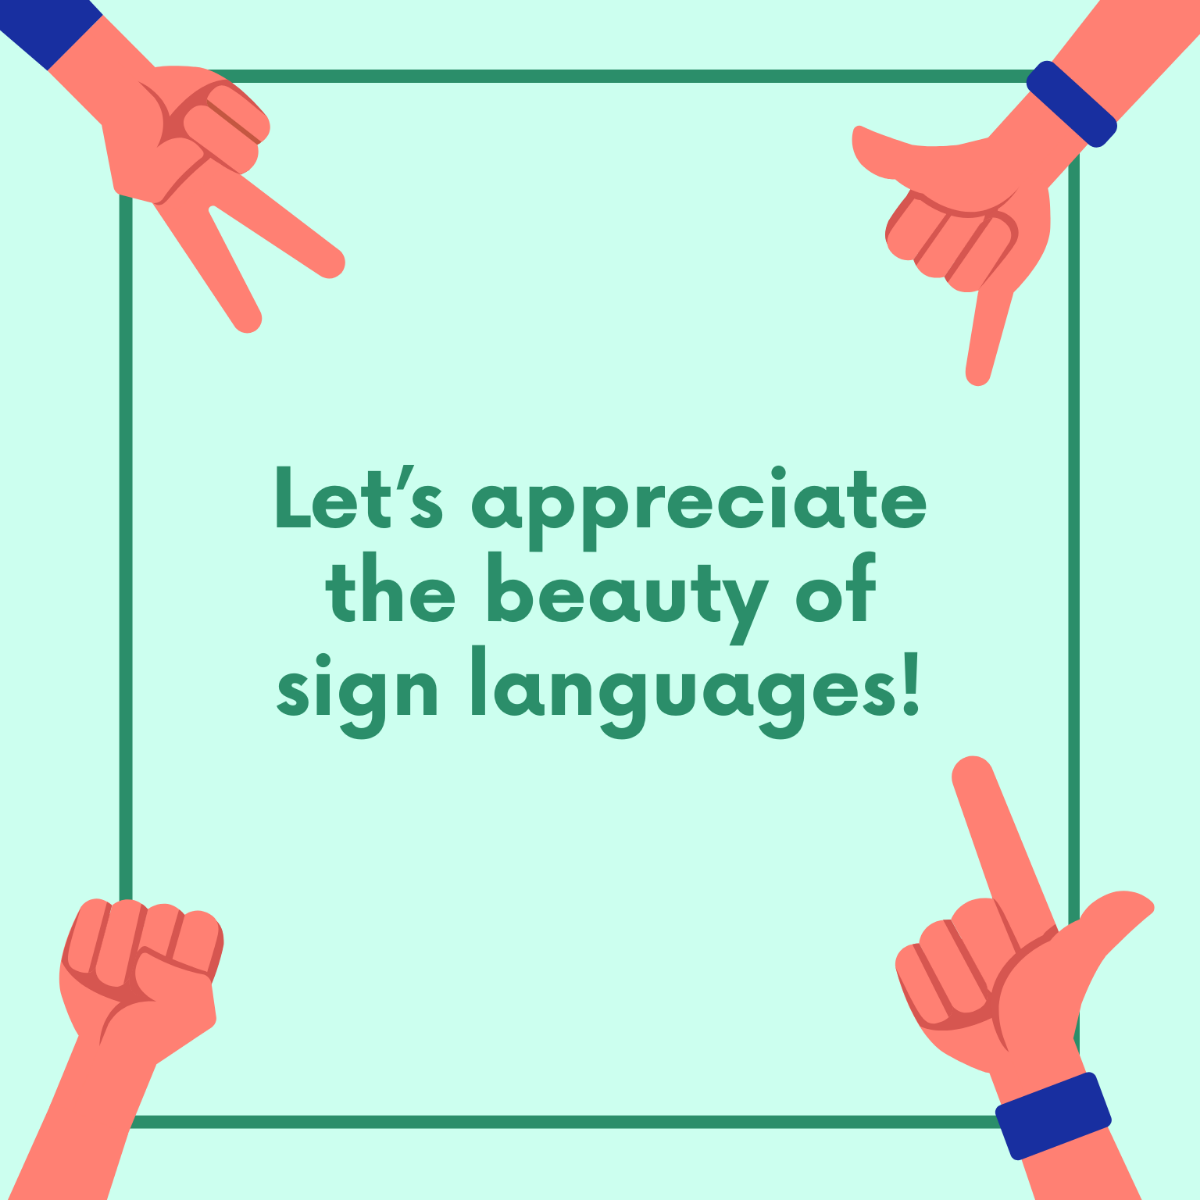 International Day of Sign Languages Greeting Card Vector